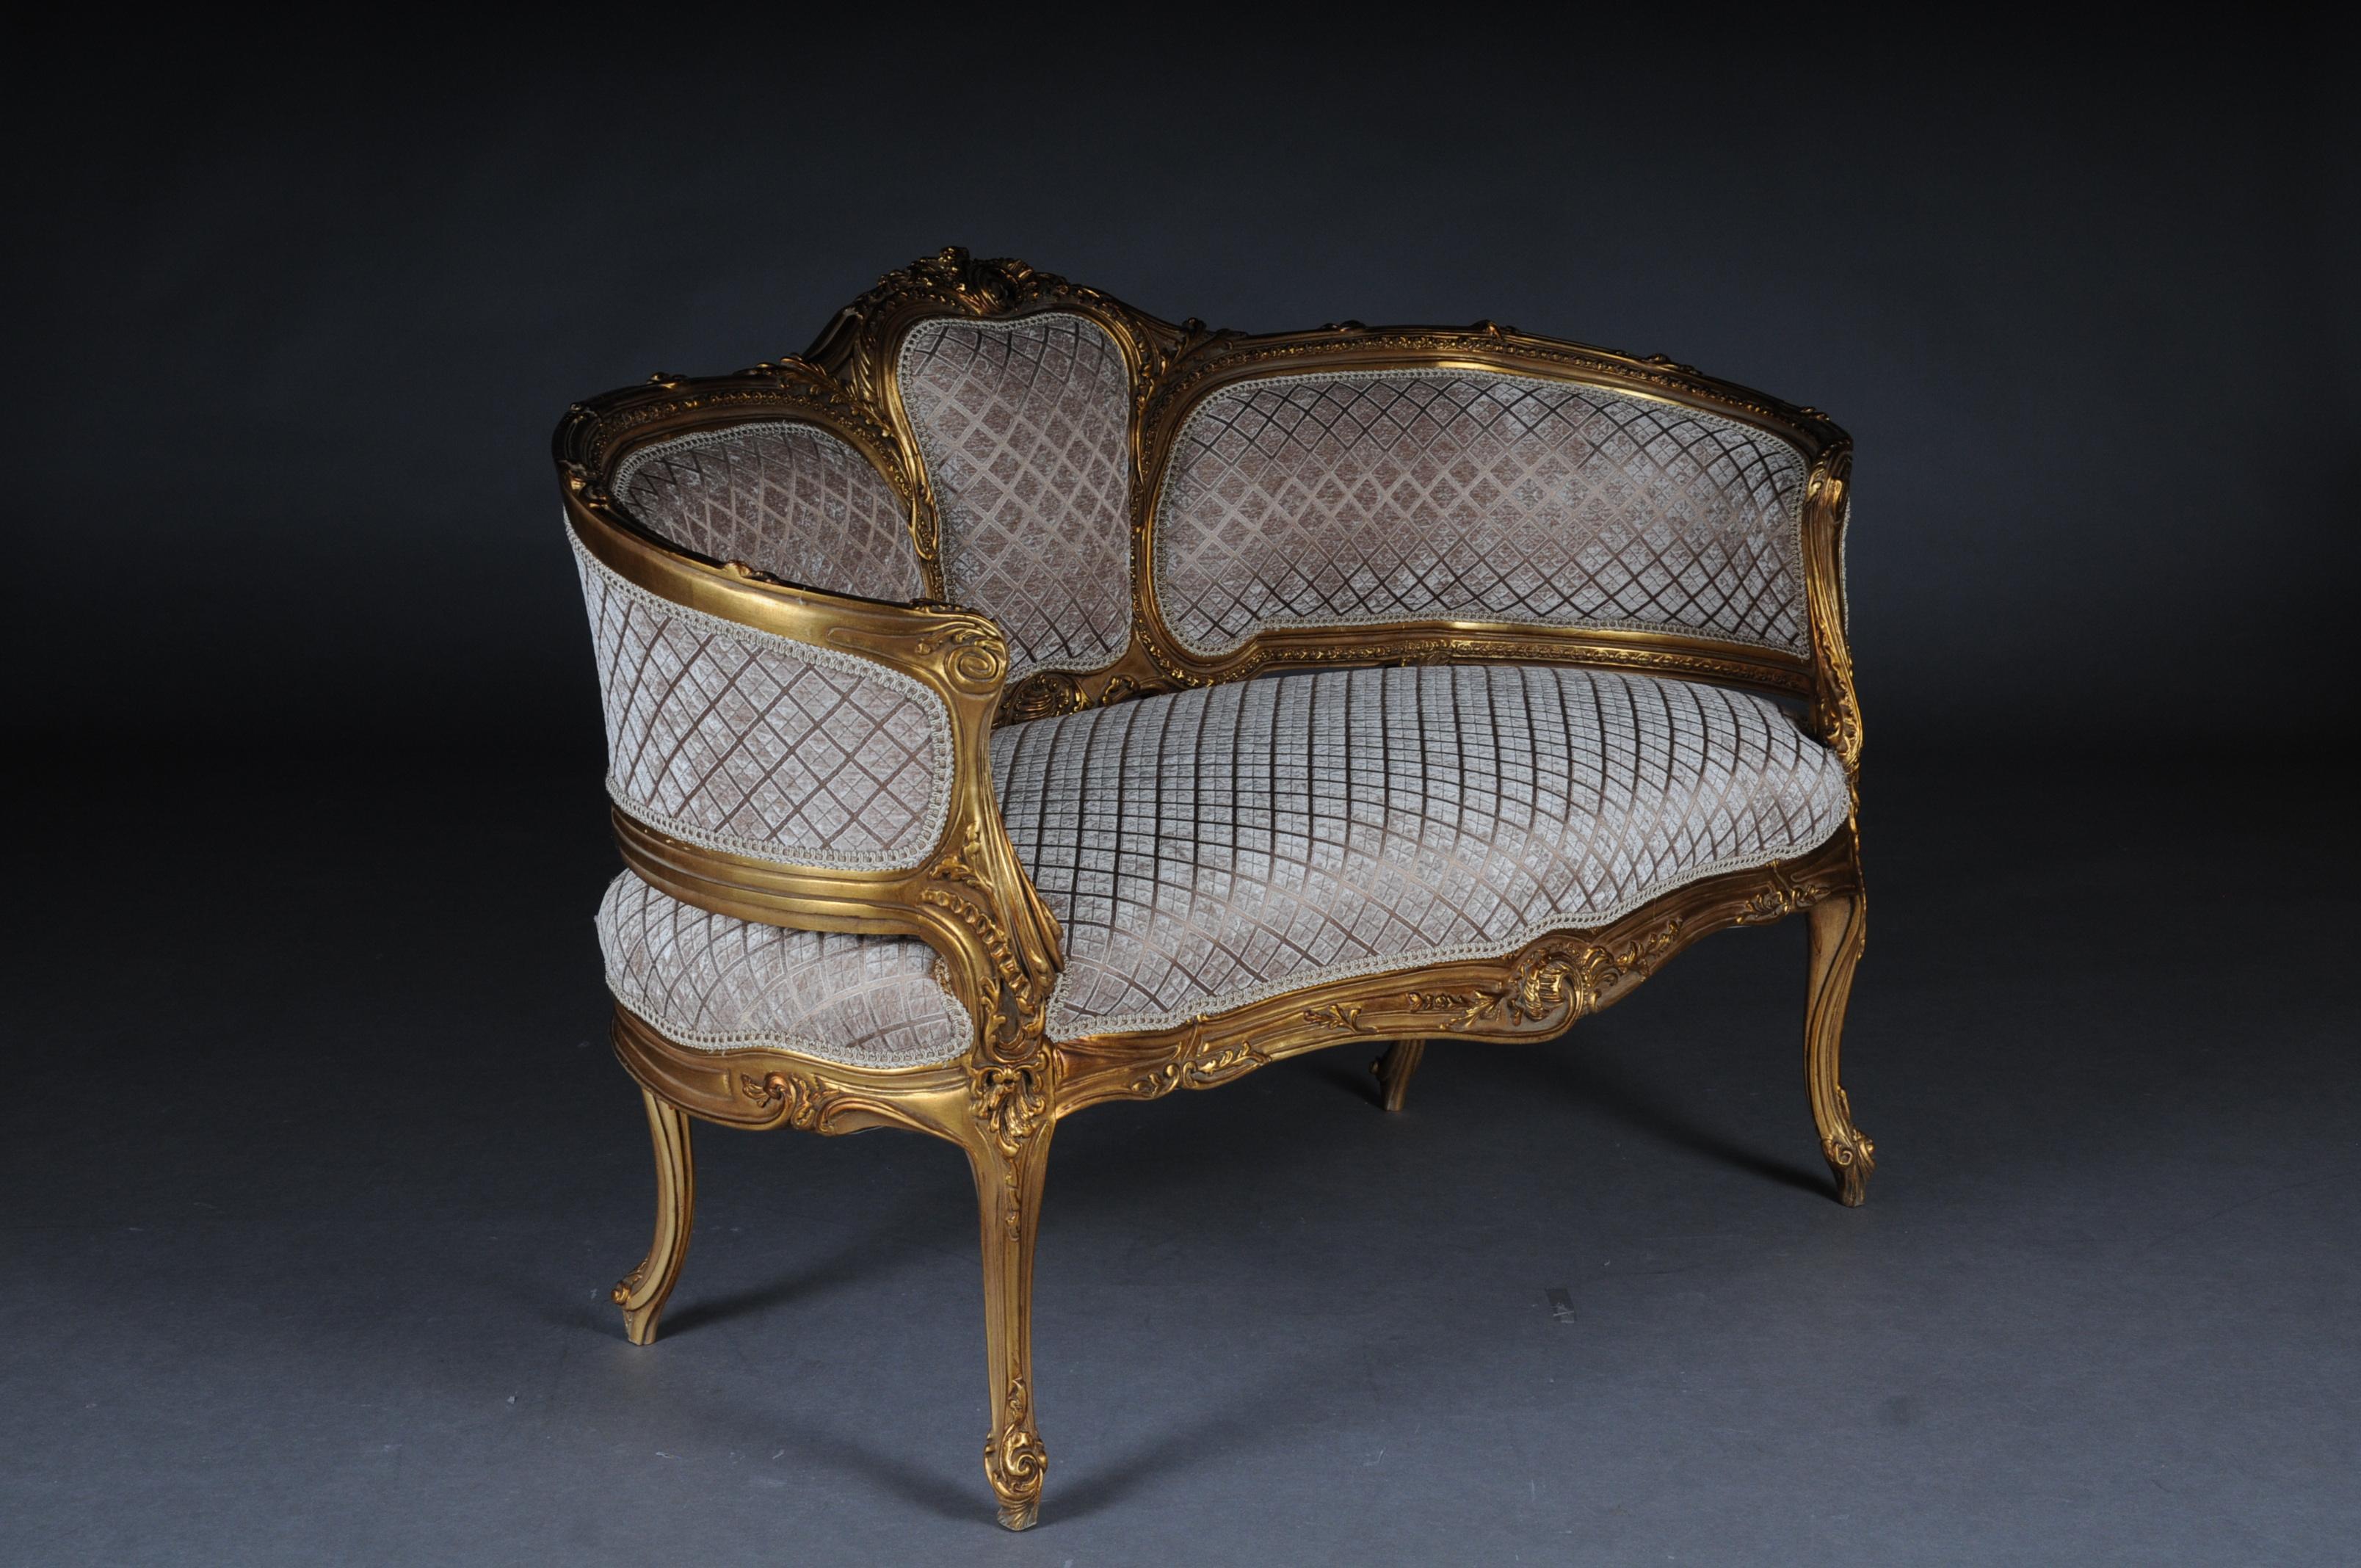 Luxurious Sofa, Canapé, Couch in Rococo or Louis XV Style (Holz)